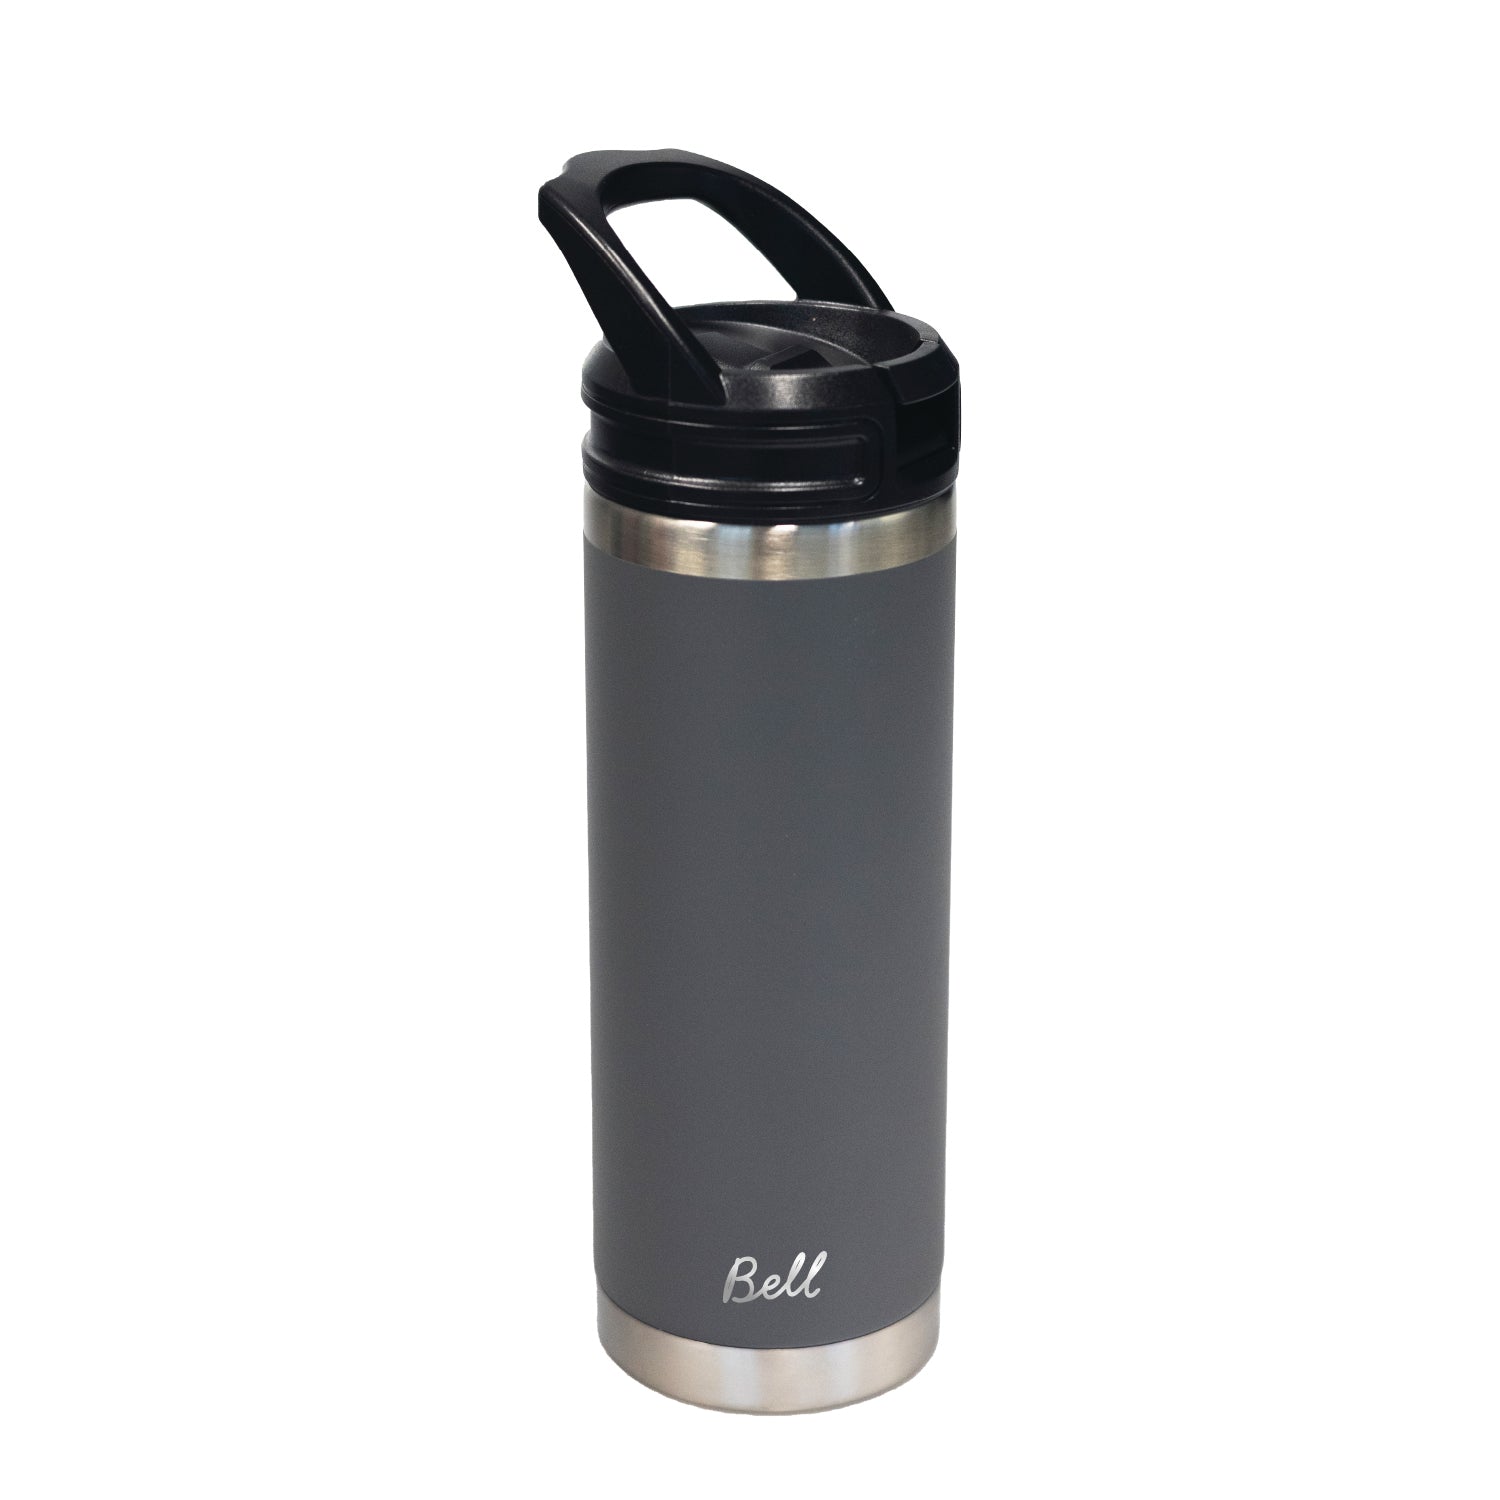 Bell Stainless Steel - Sipper lid and Handle - 532ml (18oz)